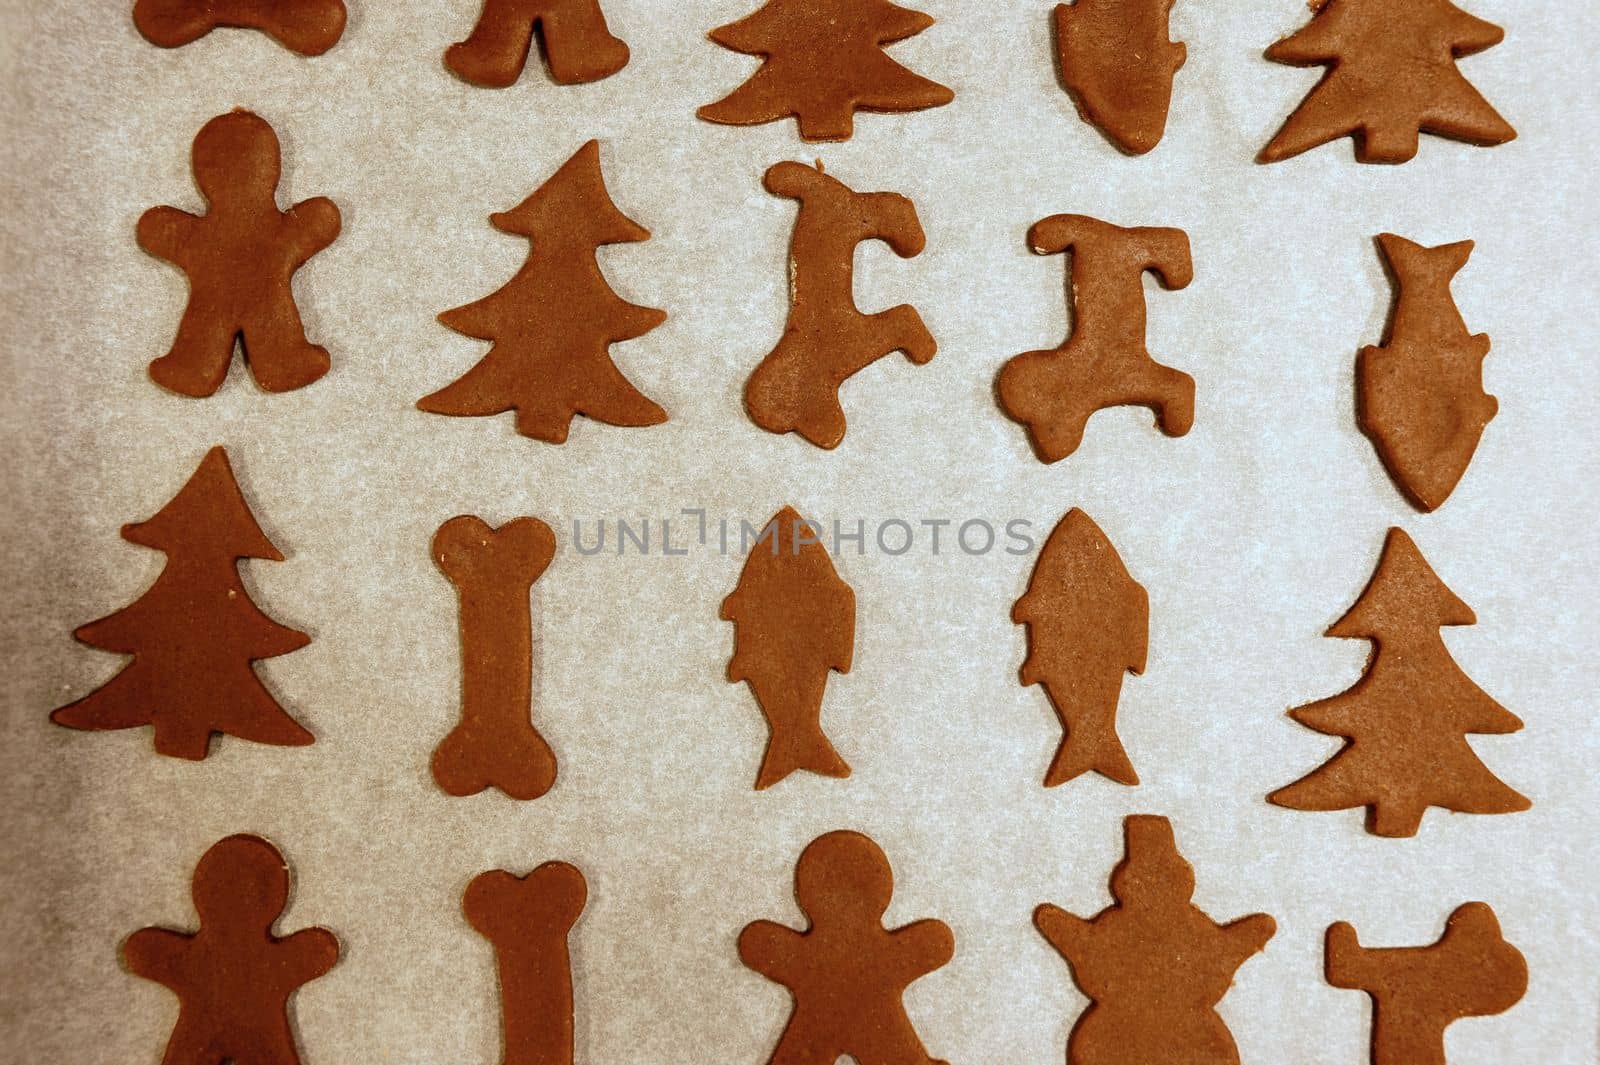 Christmas cookies - gingerbread. Preparation for baking homemade traditional sweets for the Christmas holidays in the Czech Republic. by Montypeter